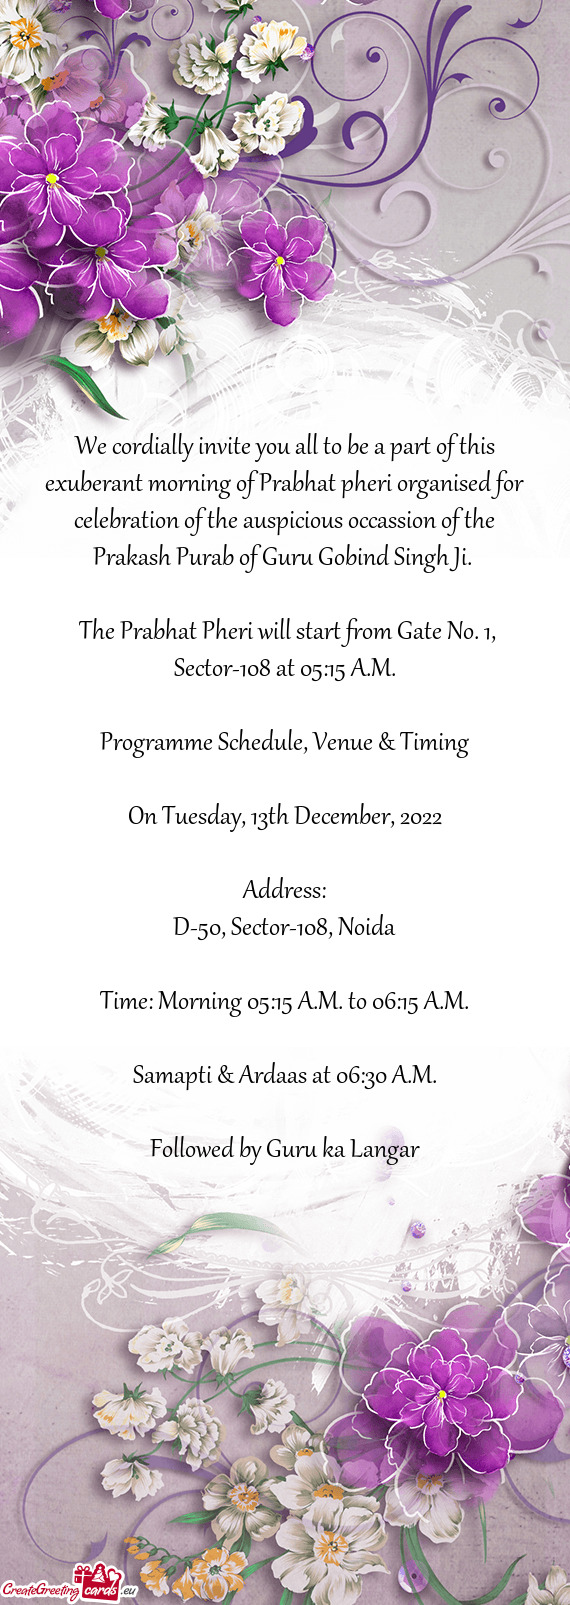 We cordially invite you all to be a part of this exuberant morning of Prabhat pheri organised for ce